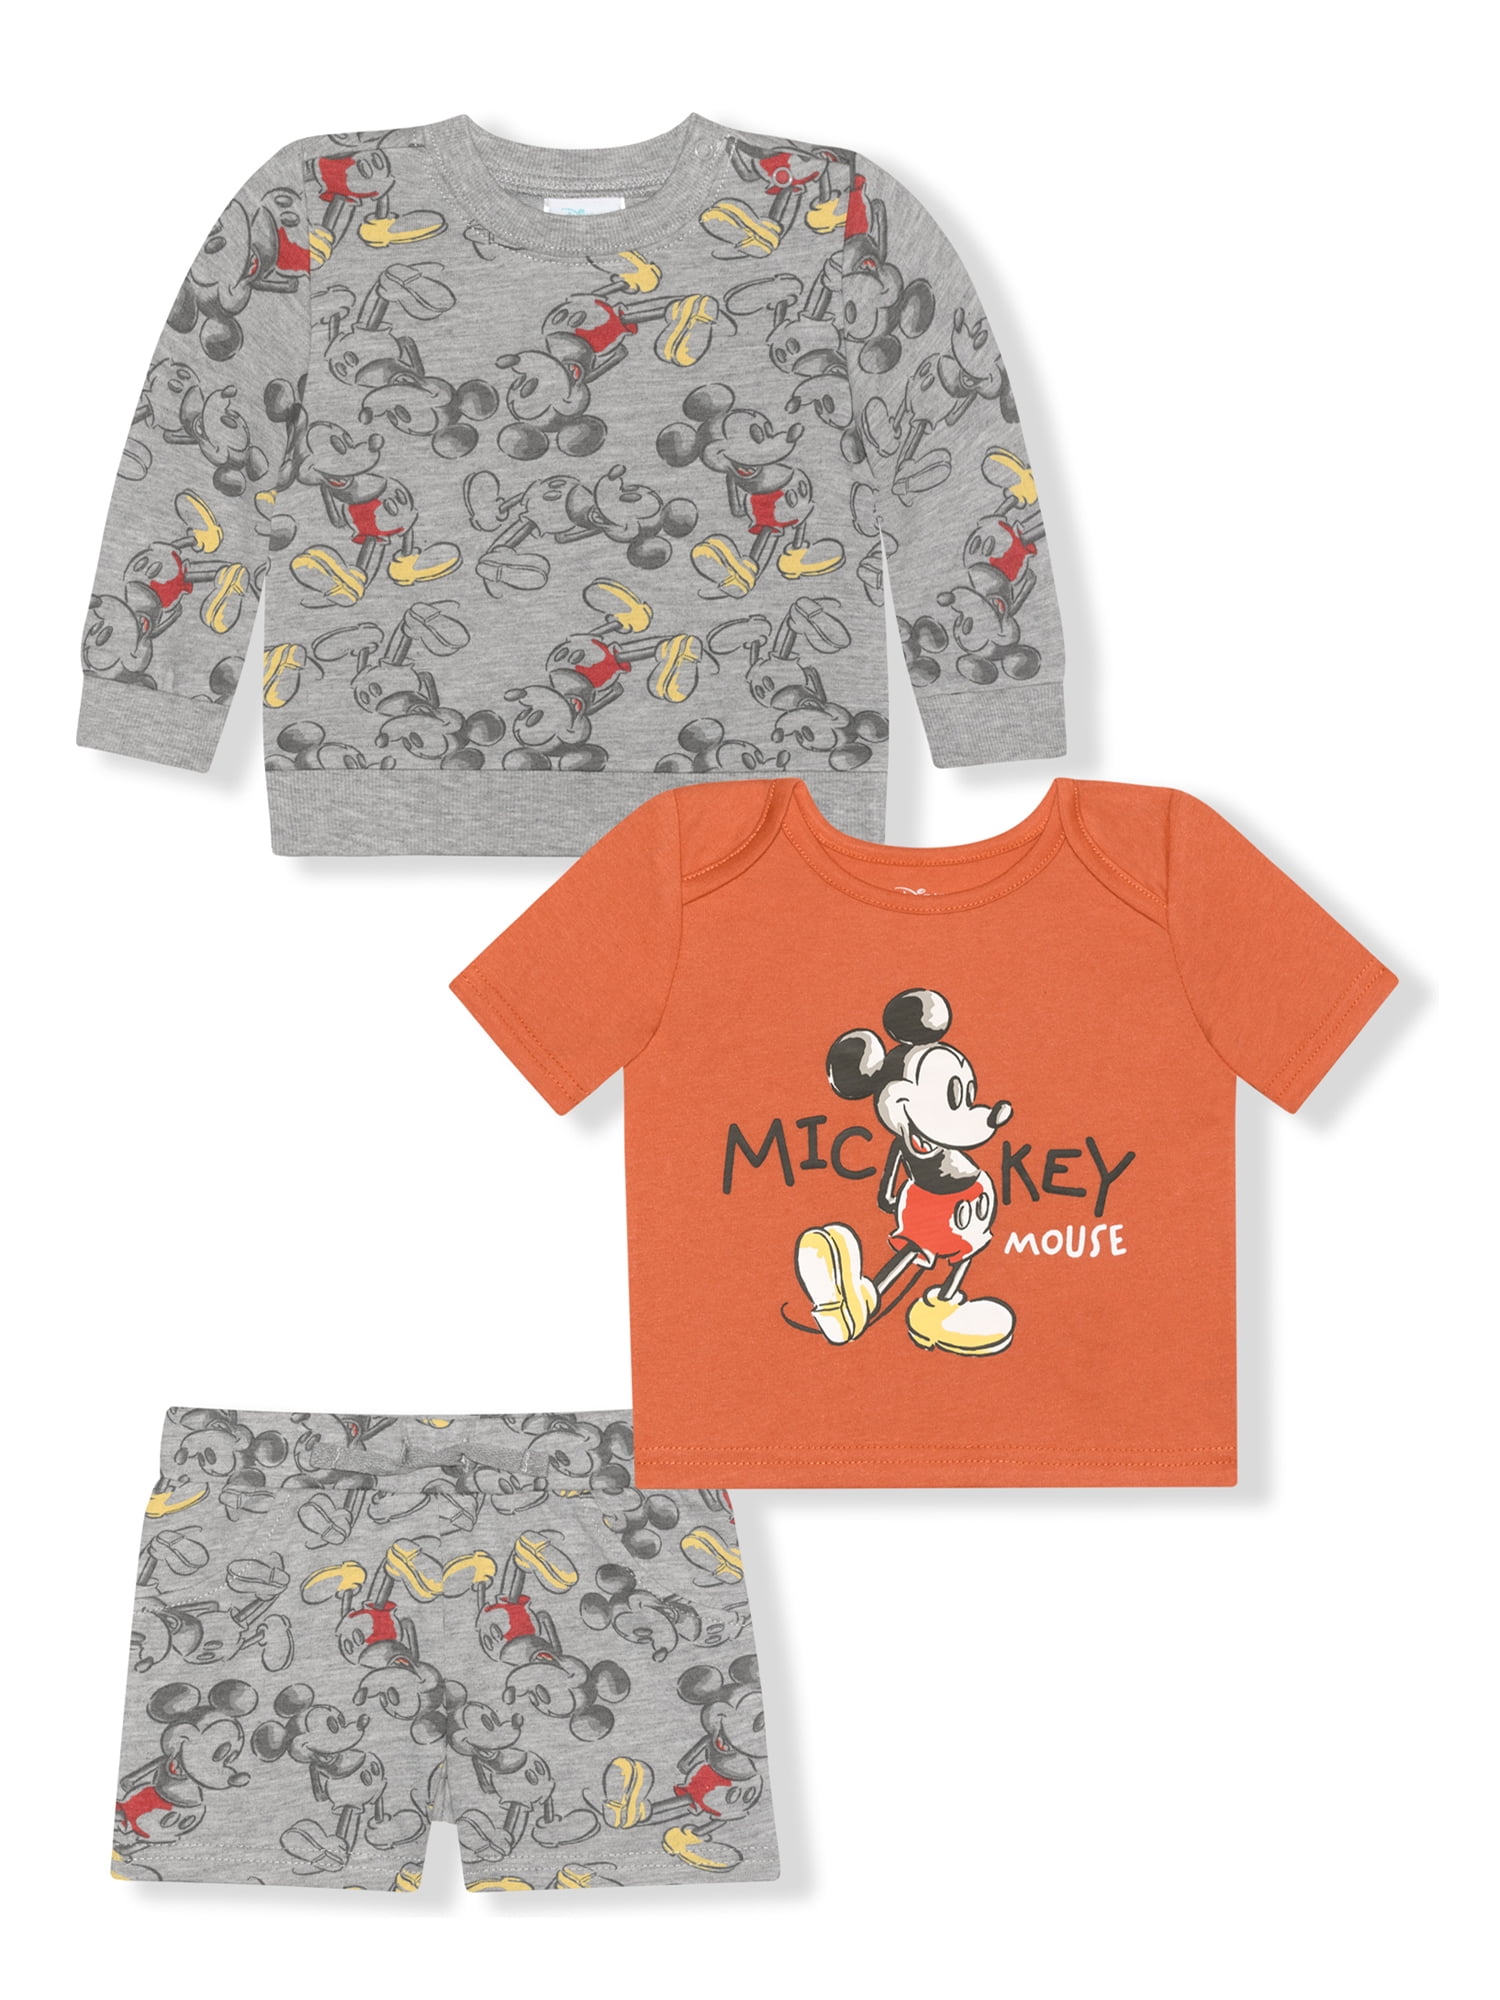 NEW KIDS BOYS INFANT MICKEY MOUSE BEACH BODYSUIT AND SHORTS SIZE 0/3M 3/6M MONTH 